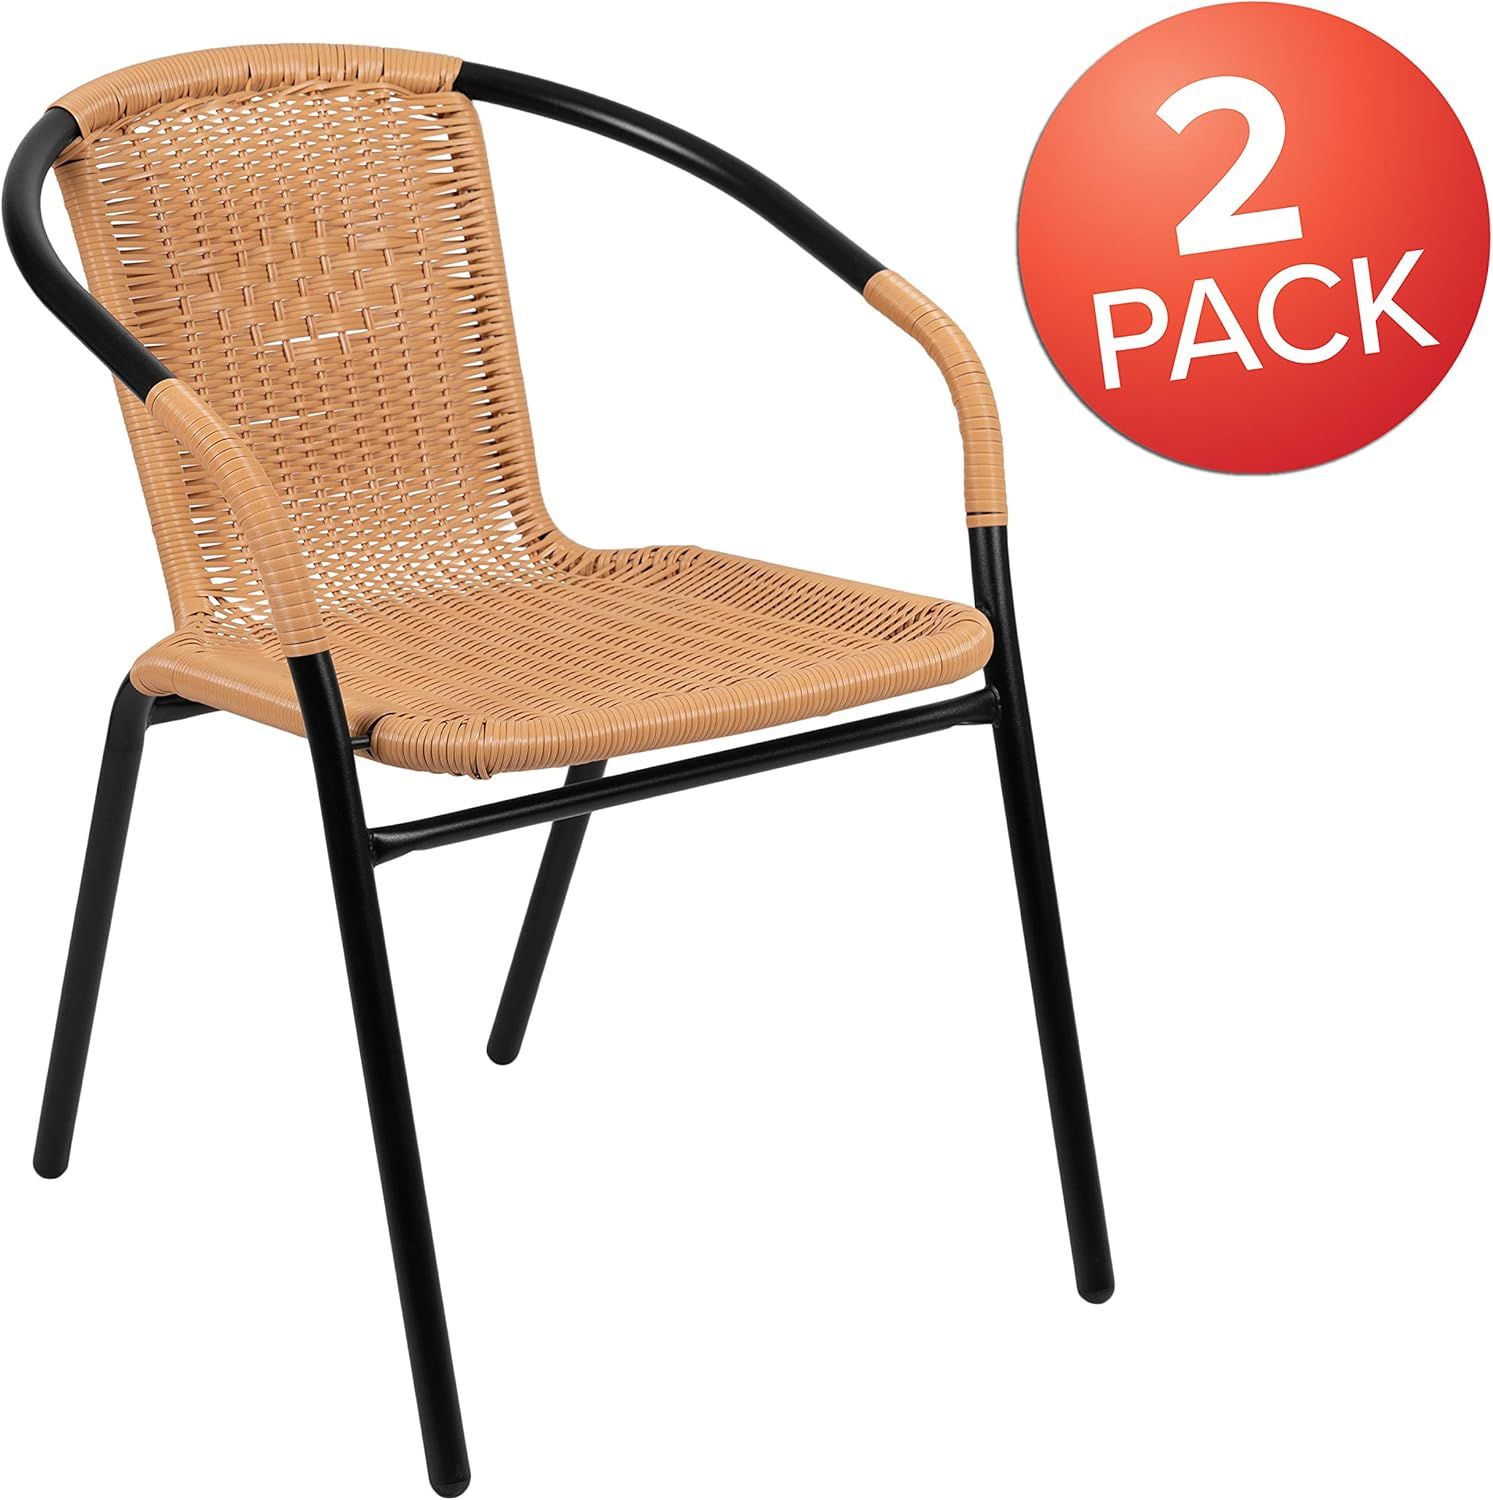 EMMA + OLIVER 2 Pack Beige Rattan Indoor-Outdoor Restaurant Stack Chair with Curved Back | Amazon (US)